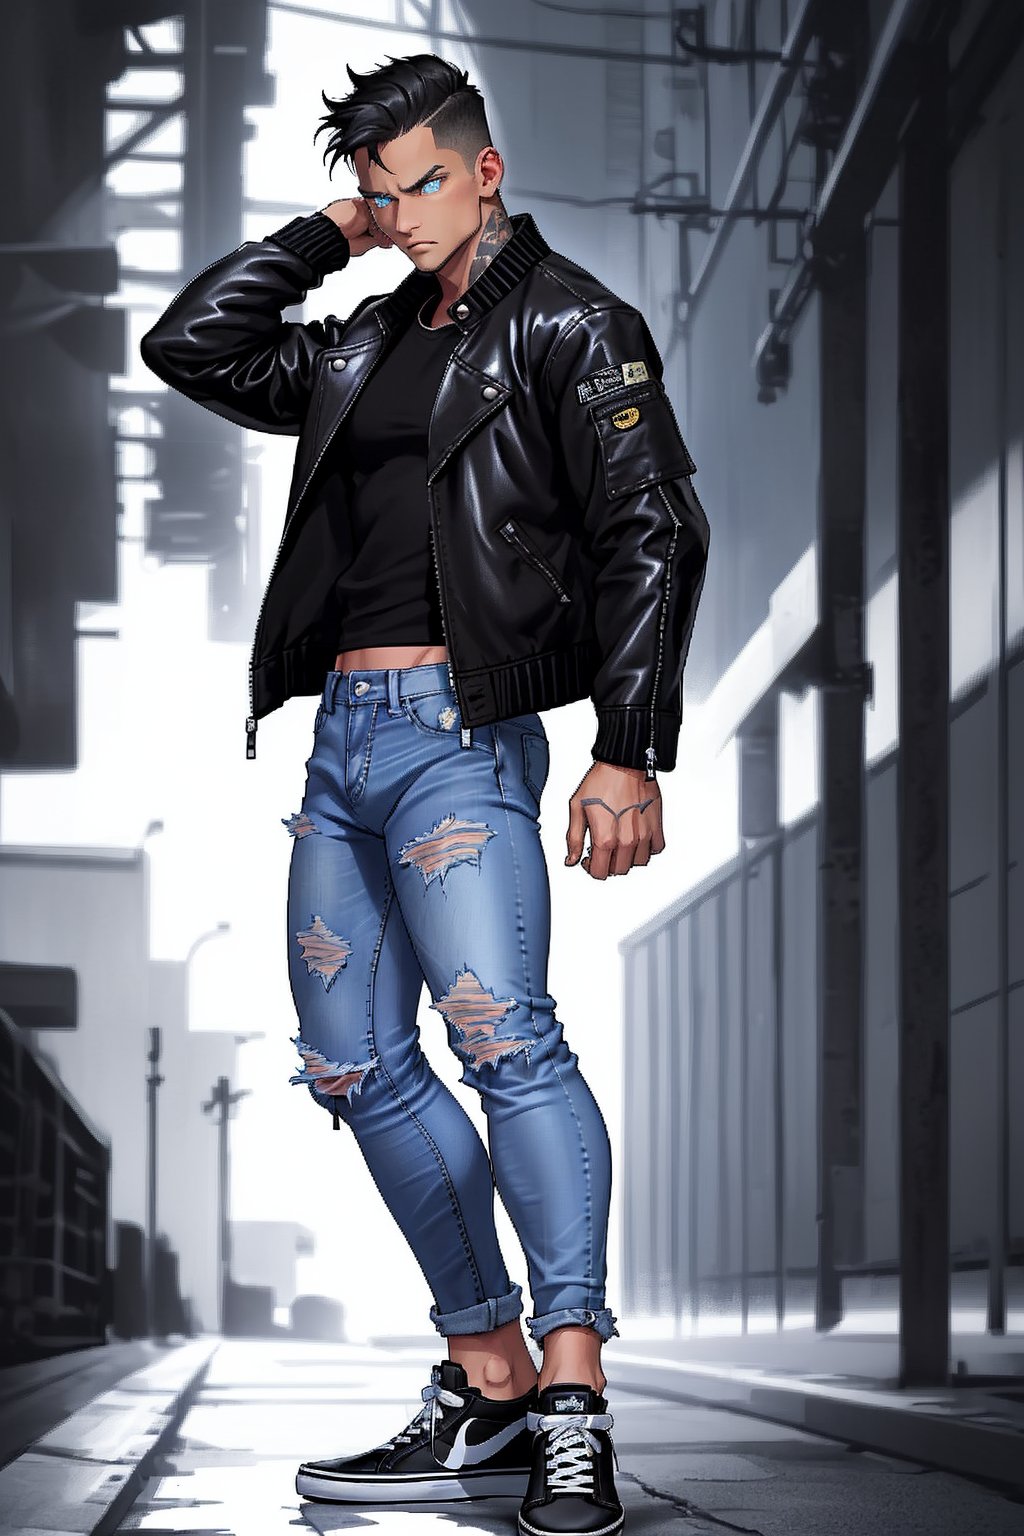 full body shot of a man posing in a fighter's stance, wearing a sleek black jacket with fitted sleeves, high-waisted acid washed jeans that rip at the knees, and matte black Vans shoes. The jacket is unbuttoned, revealing a ripped muscular frame underneath. His eyes are intense, gazing straight ahead with a hint of determination. 